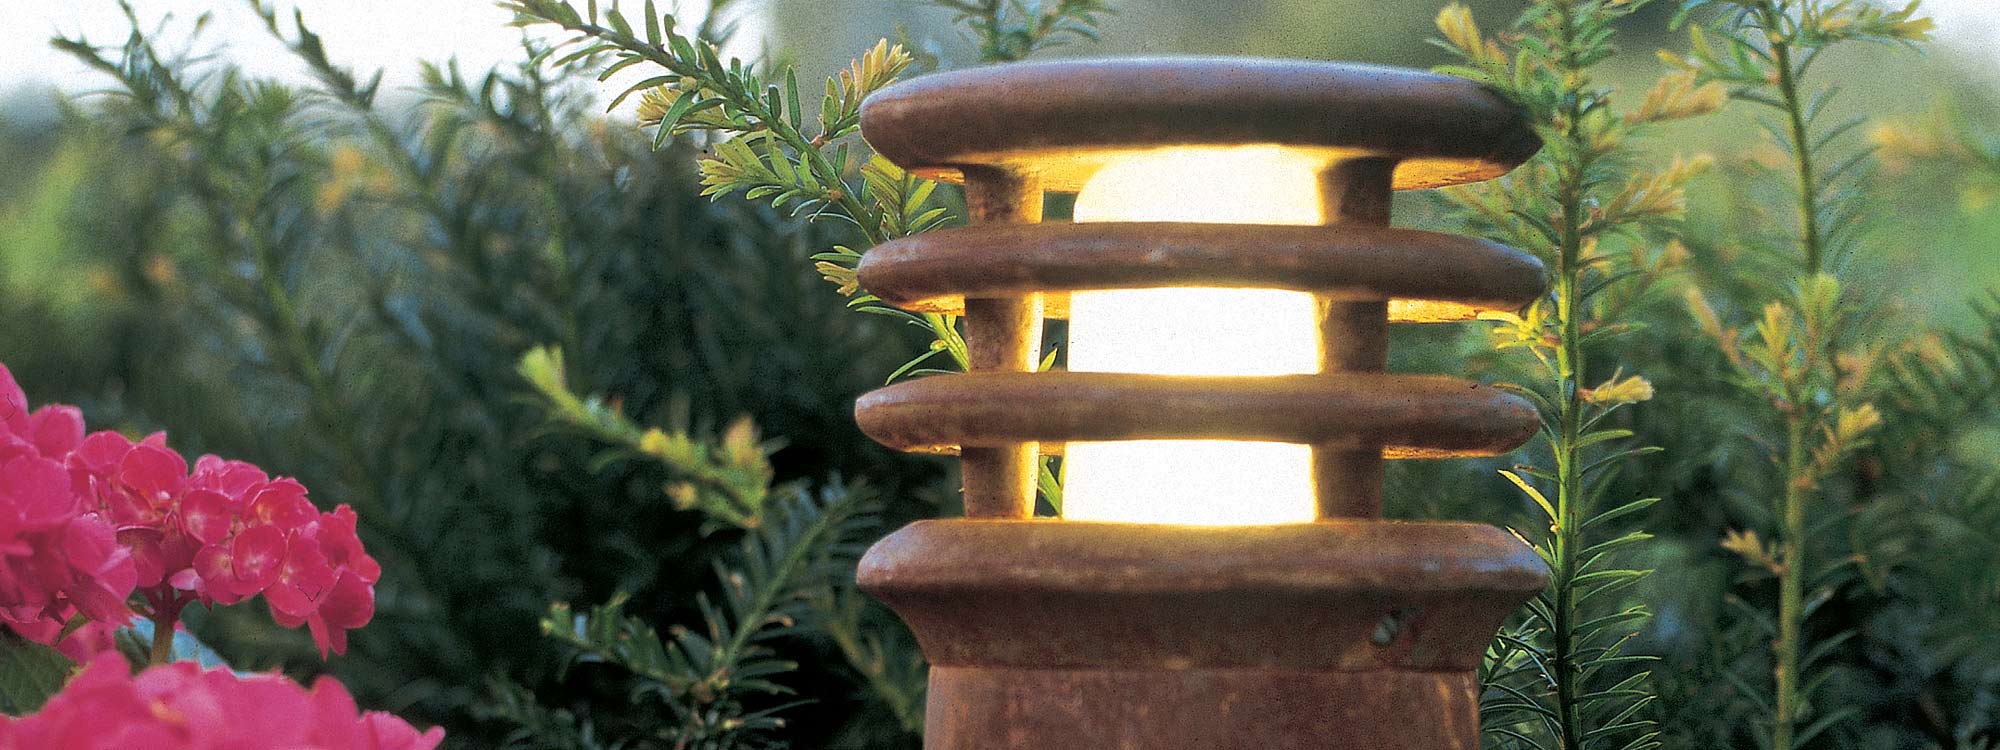 Image of Royal Botania Rusty modern garden bollard light in oxidised iron, shown with Taxus baccata in the background